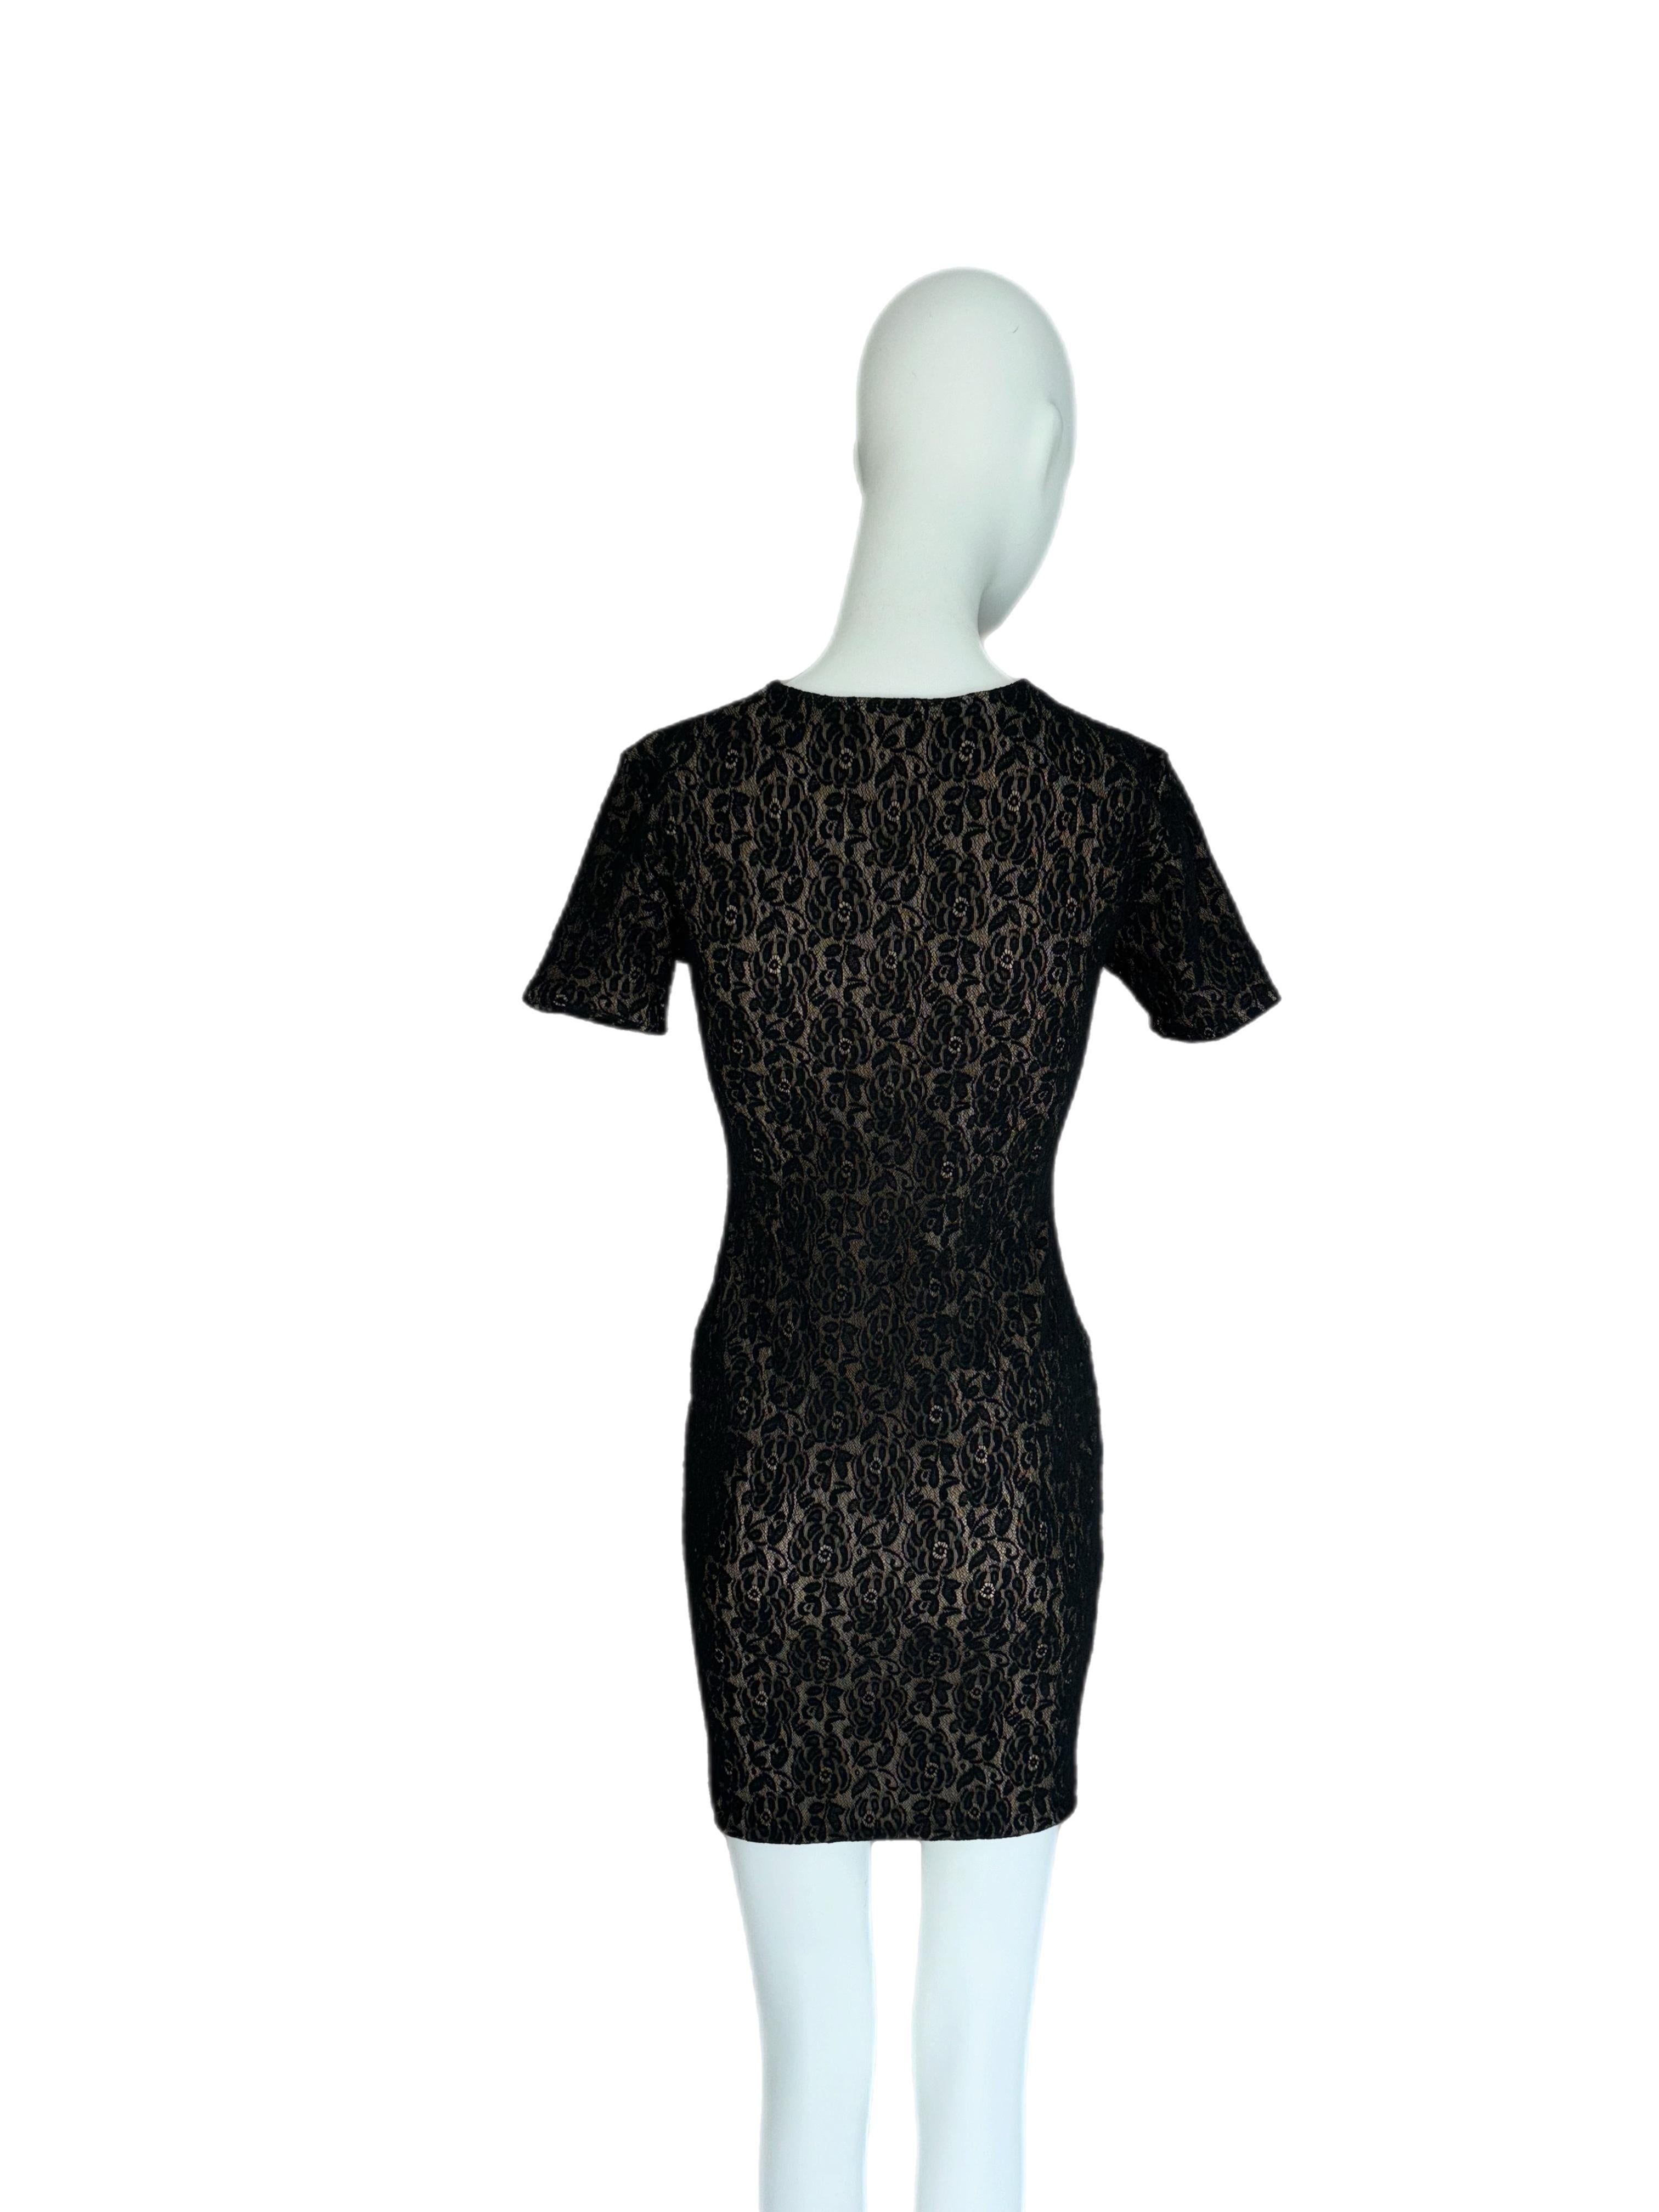 MICHAEL KORS COLLECTION 1992 Vintage Lace Mini Dress In New Condition For Sale In Leonardo, NJ